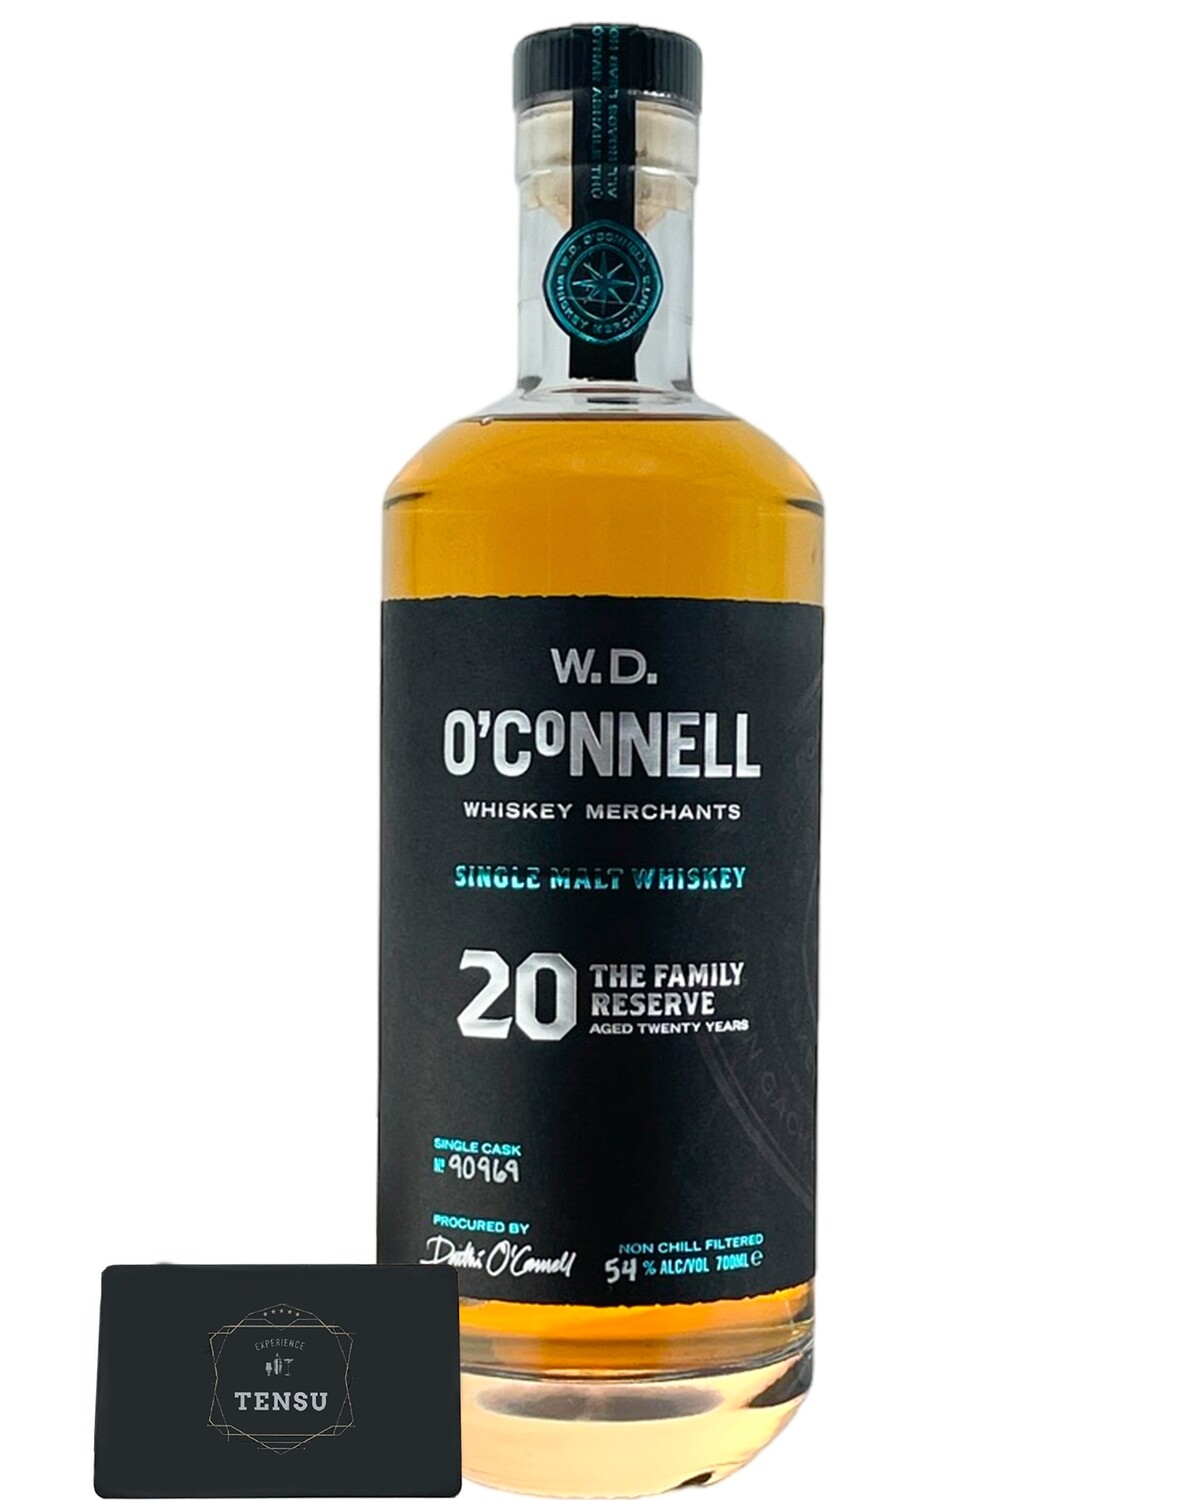 W.D. O'Connell Cooley 20Y -Rum Finish- (2002-2022) The Family Reserve 54.0 "OCWM"